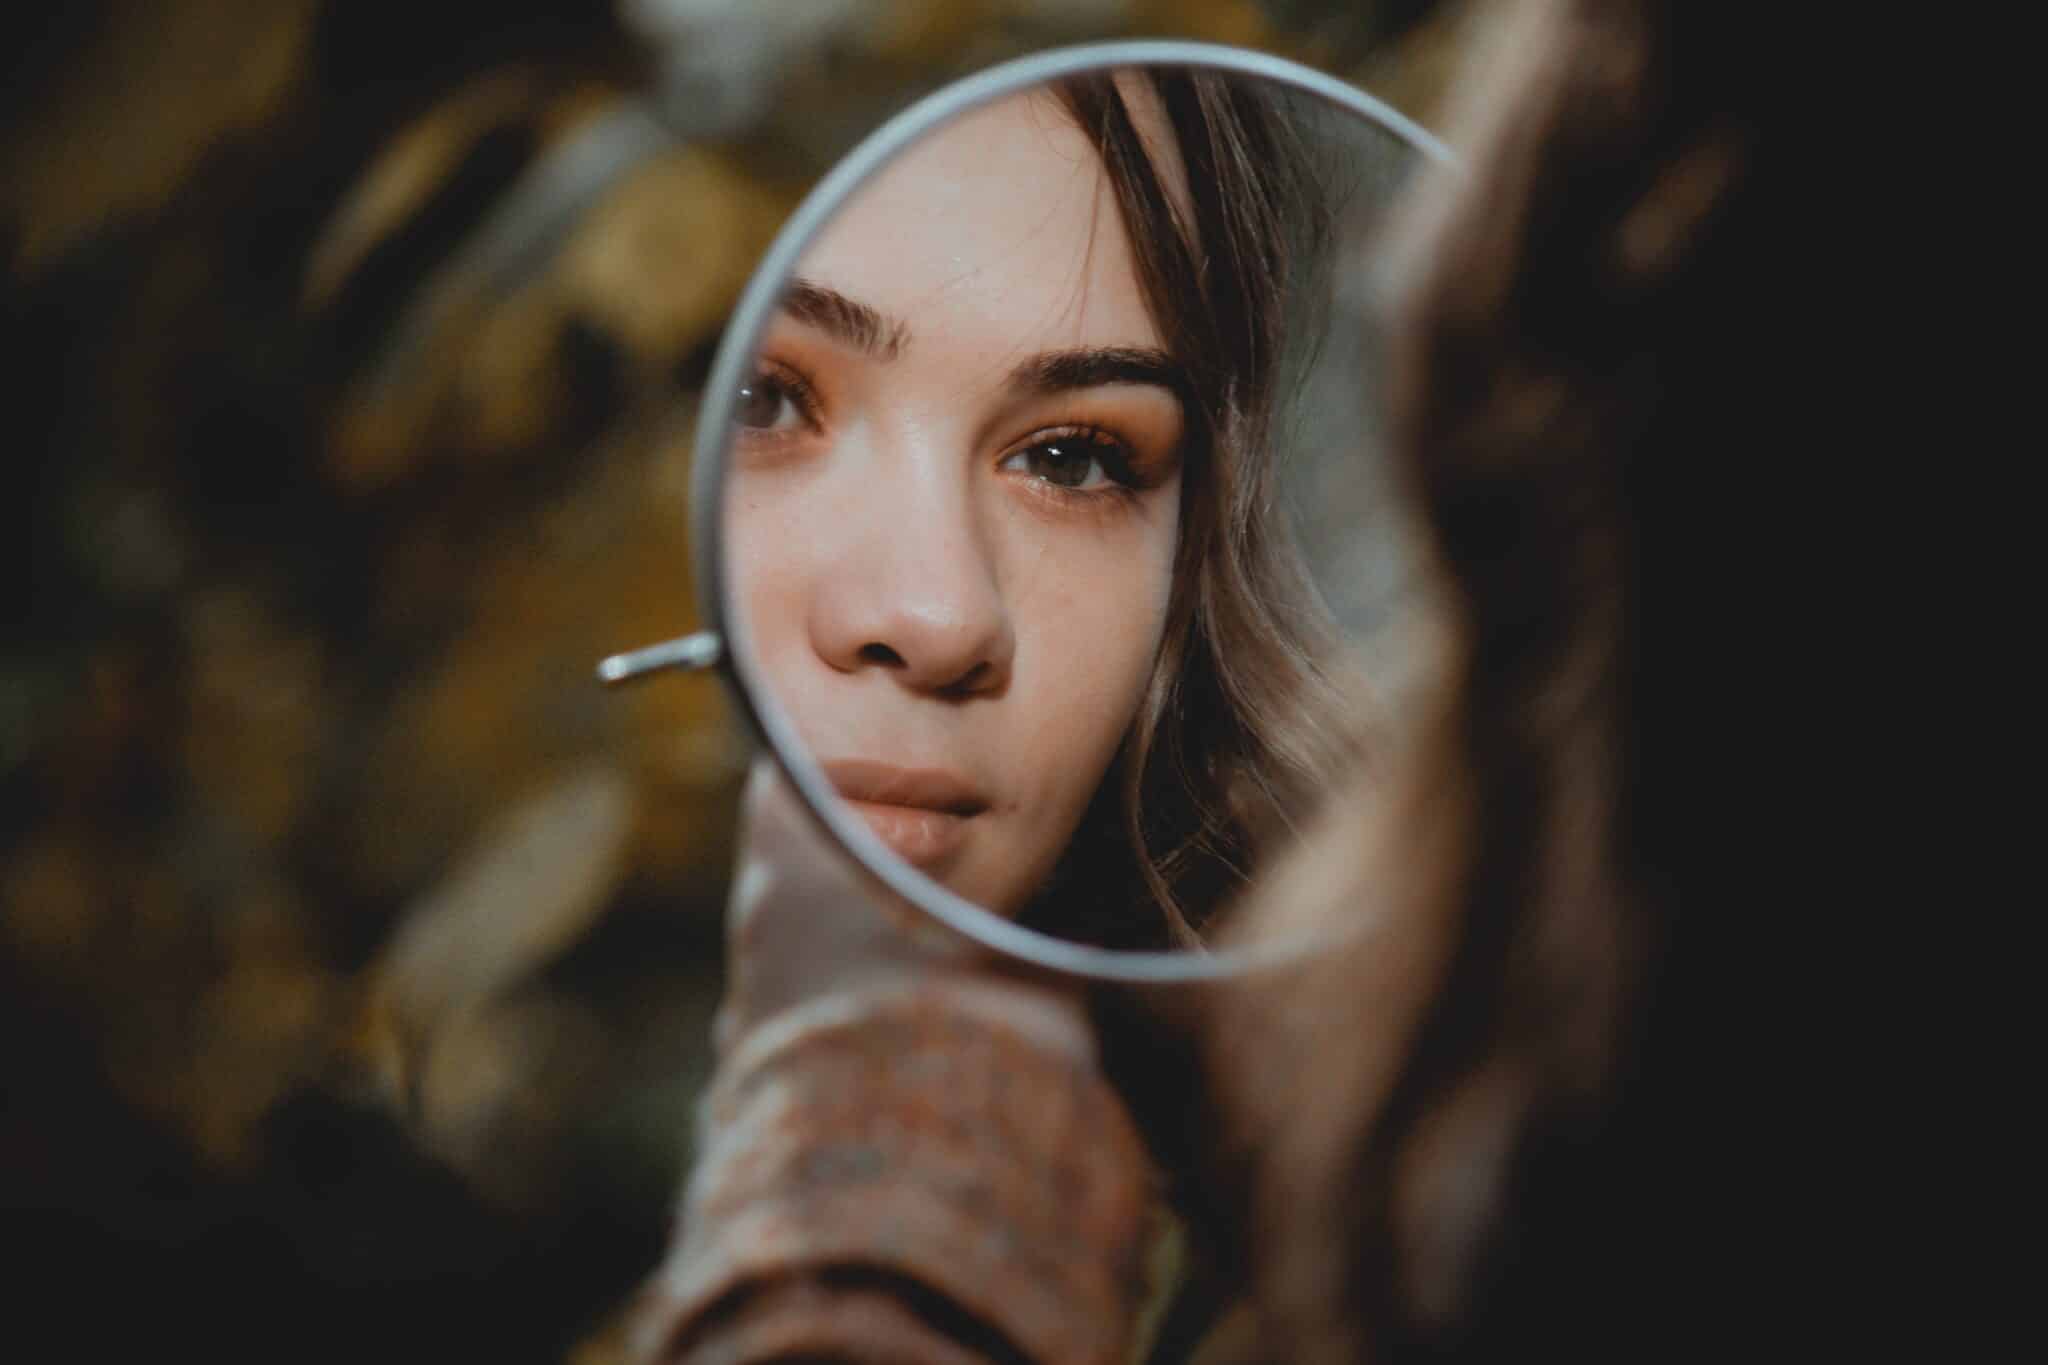 Woman looking in a mirror | Photo by Elisa Photography on Unsplash